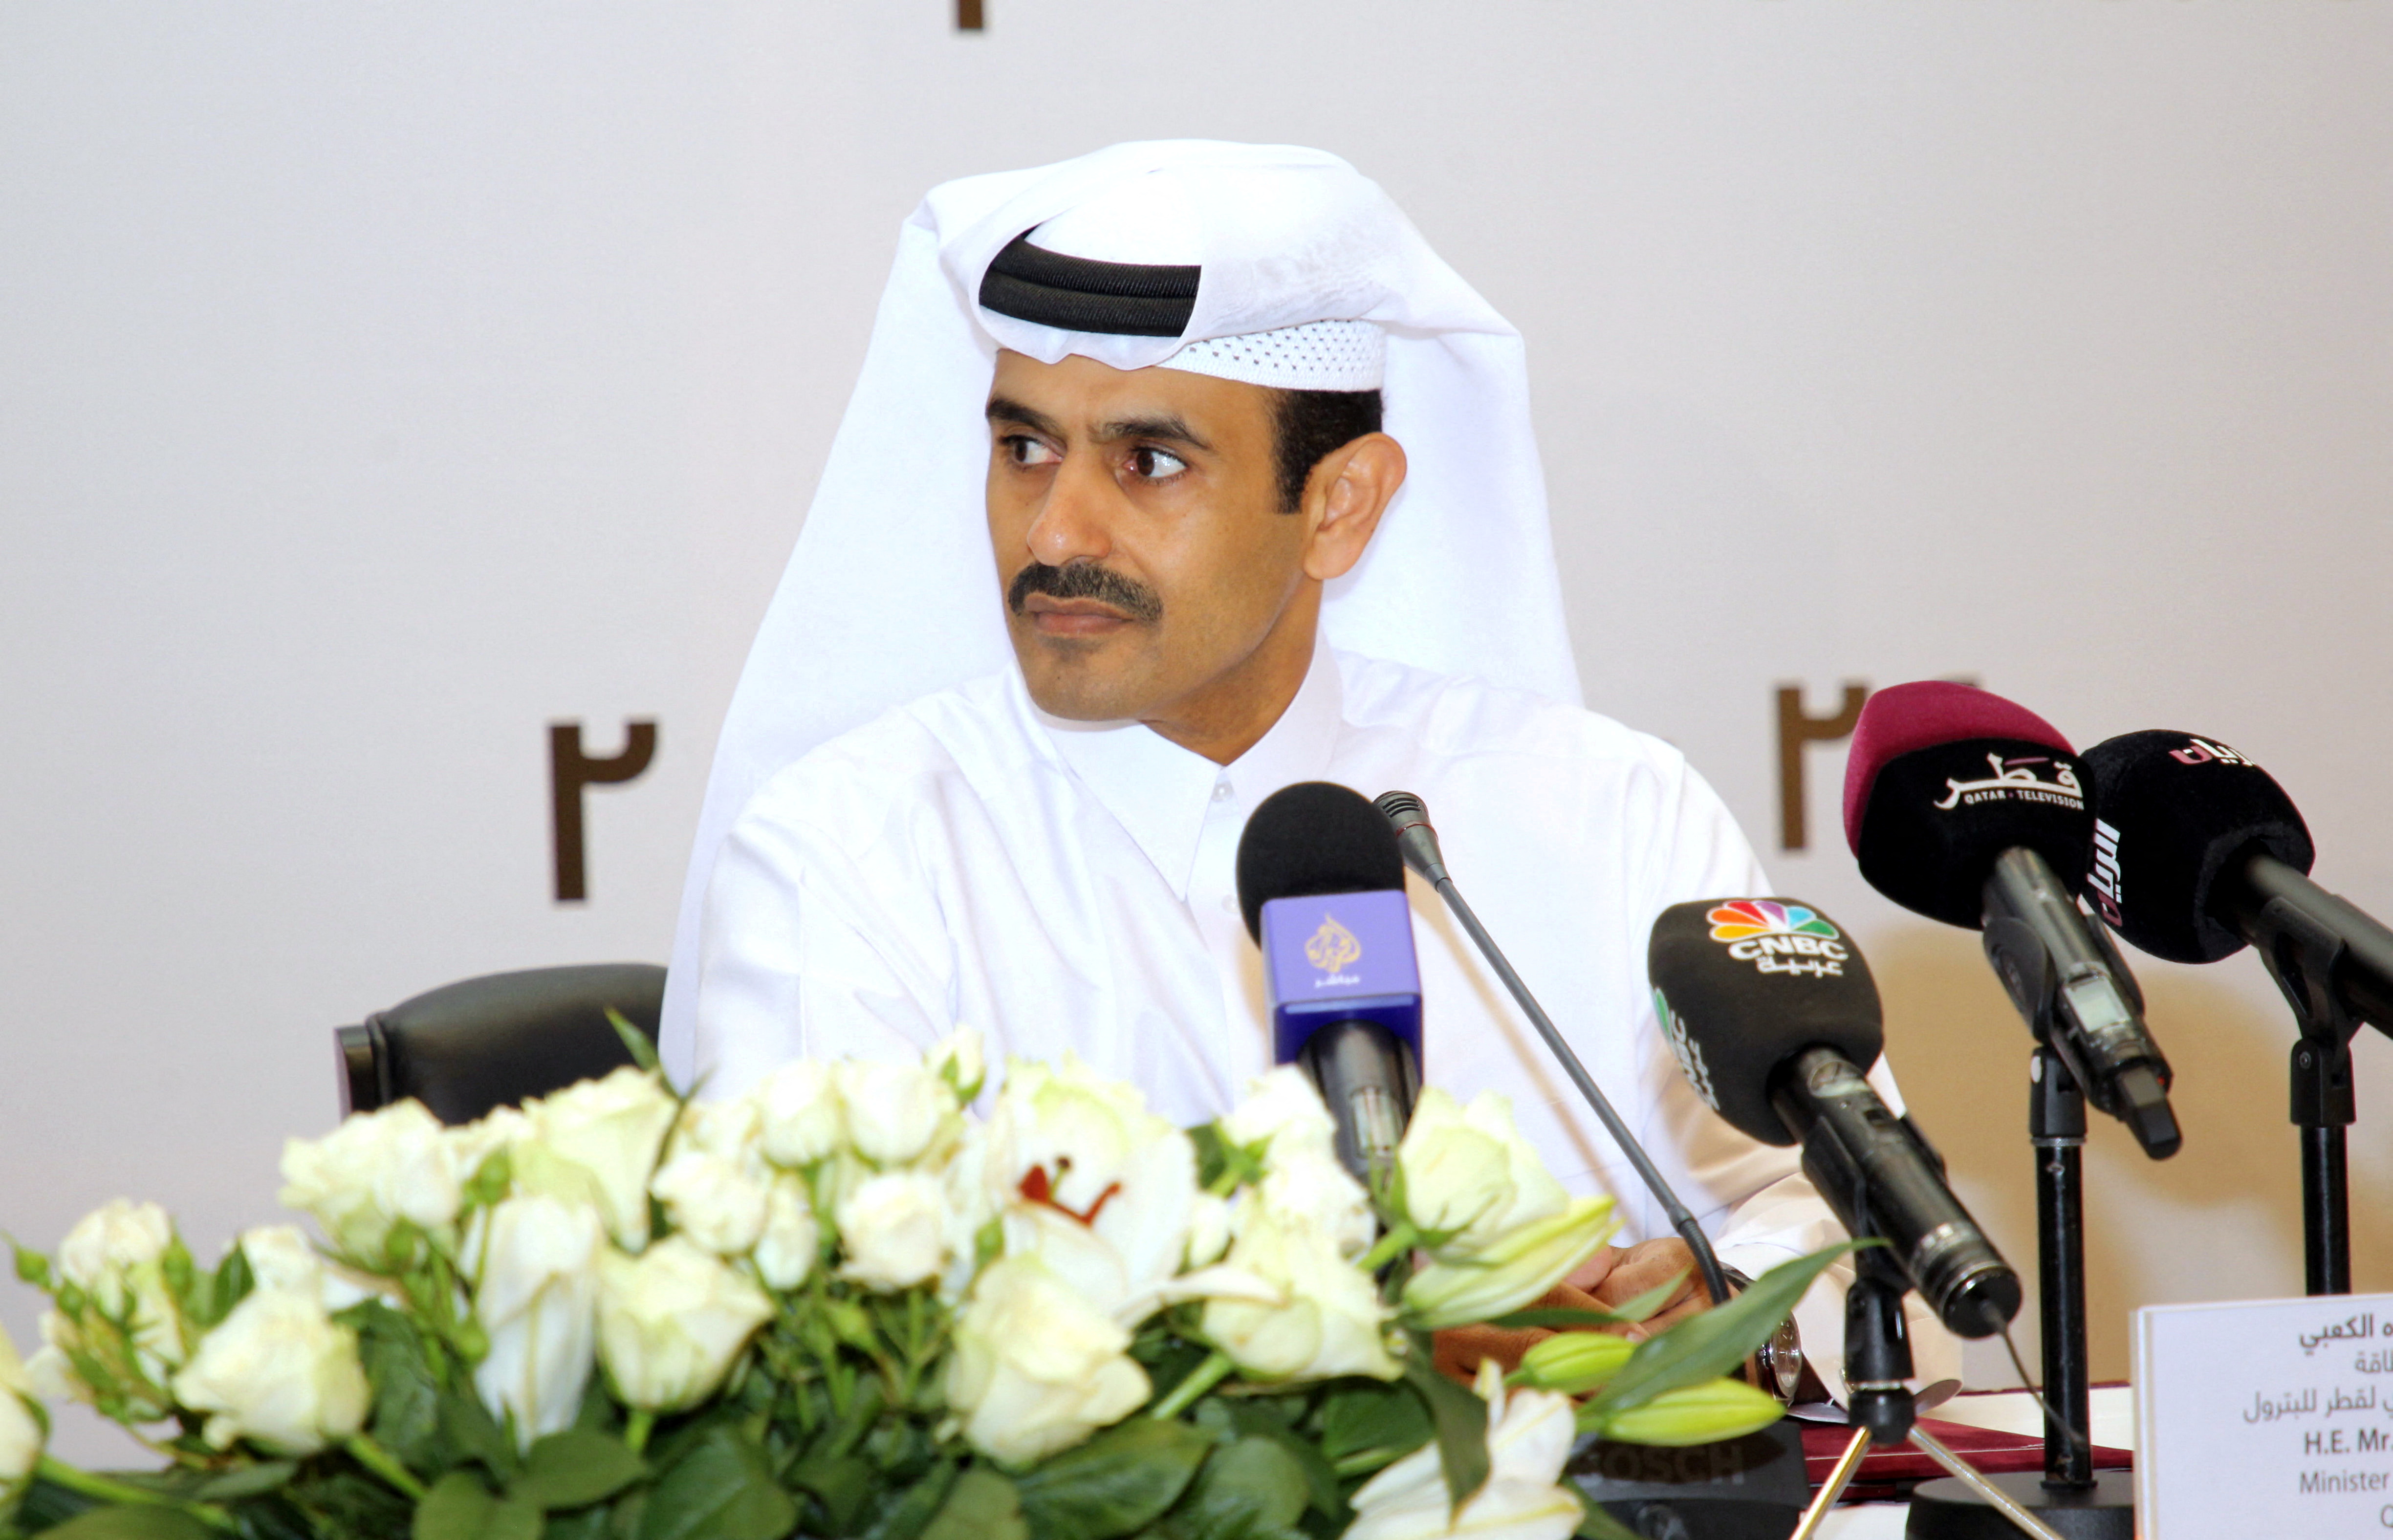 Qatar Petroleum CEO and Minister of State for Energy Saad al-Kaabi speaks during a news conference in Doha